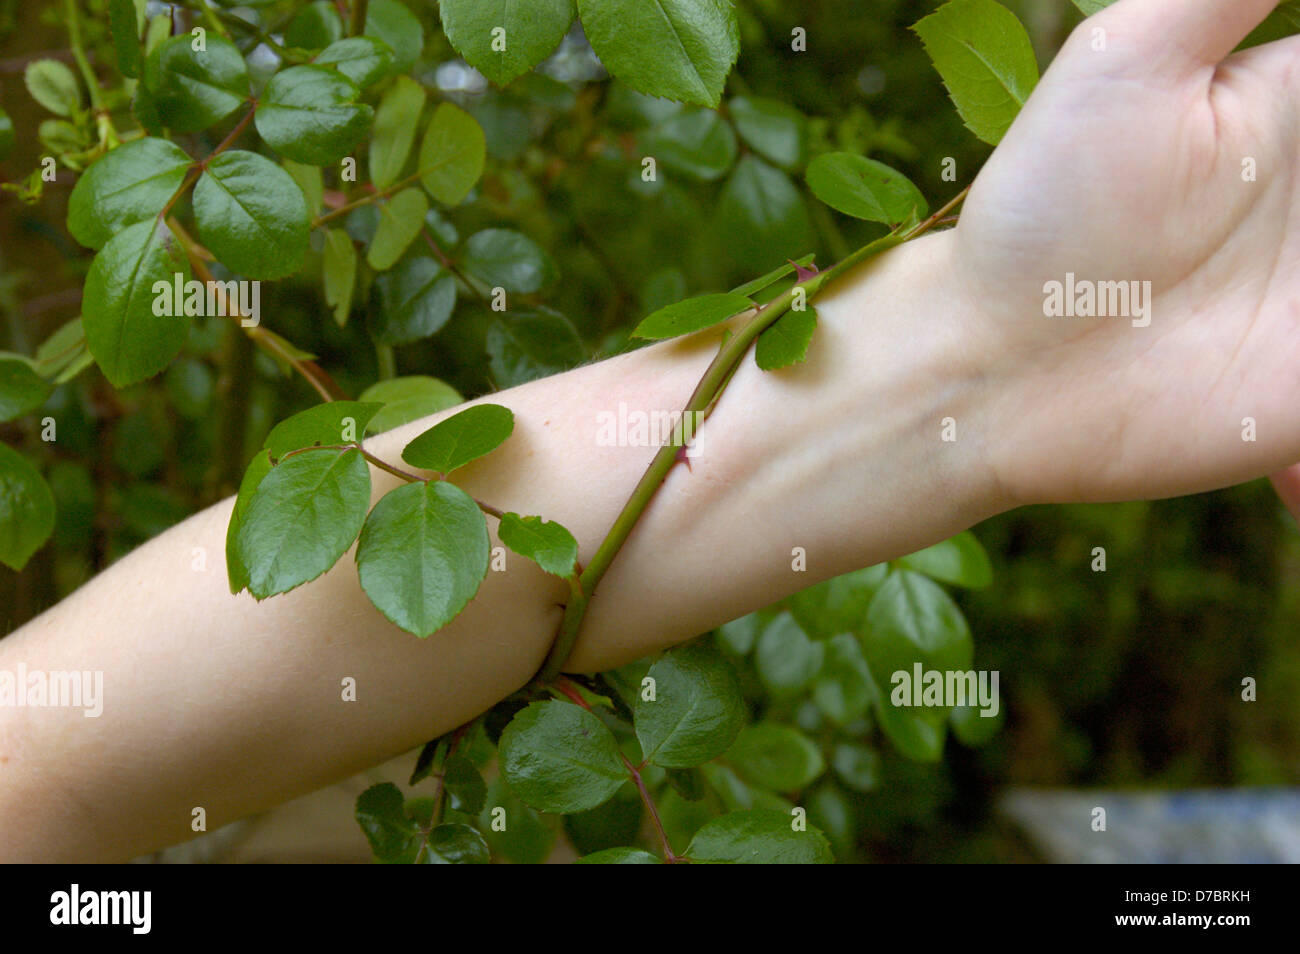 Climbing rose with thorns entwining girl's arm. Stock Photo